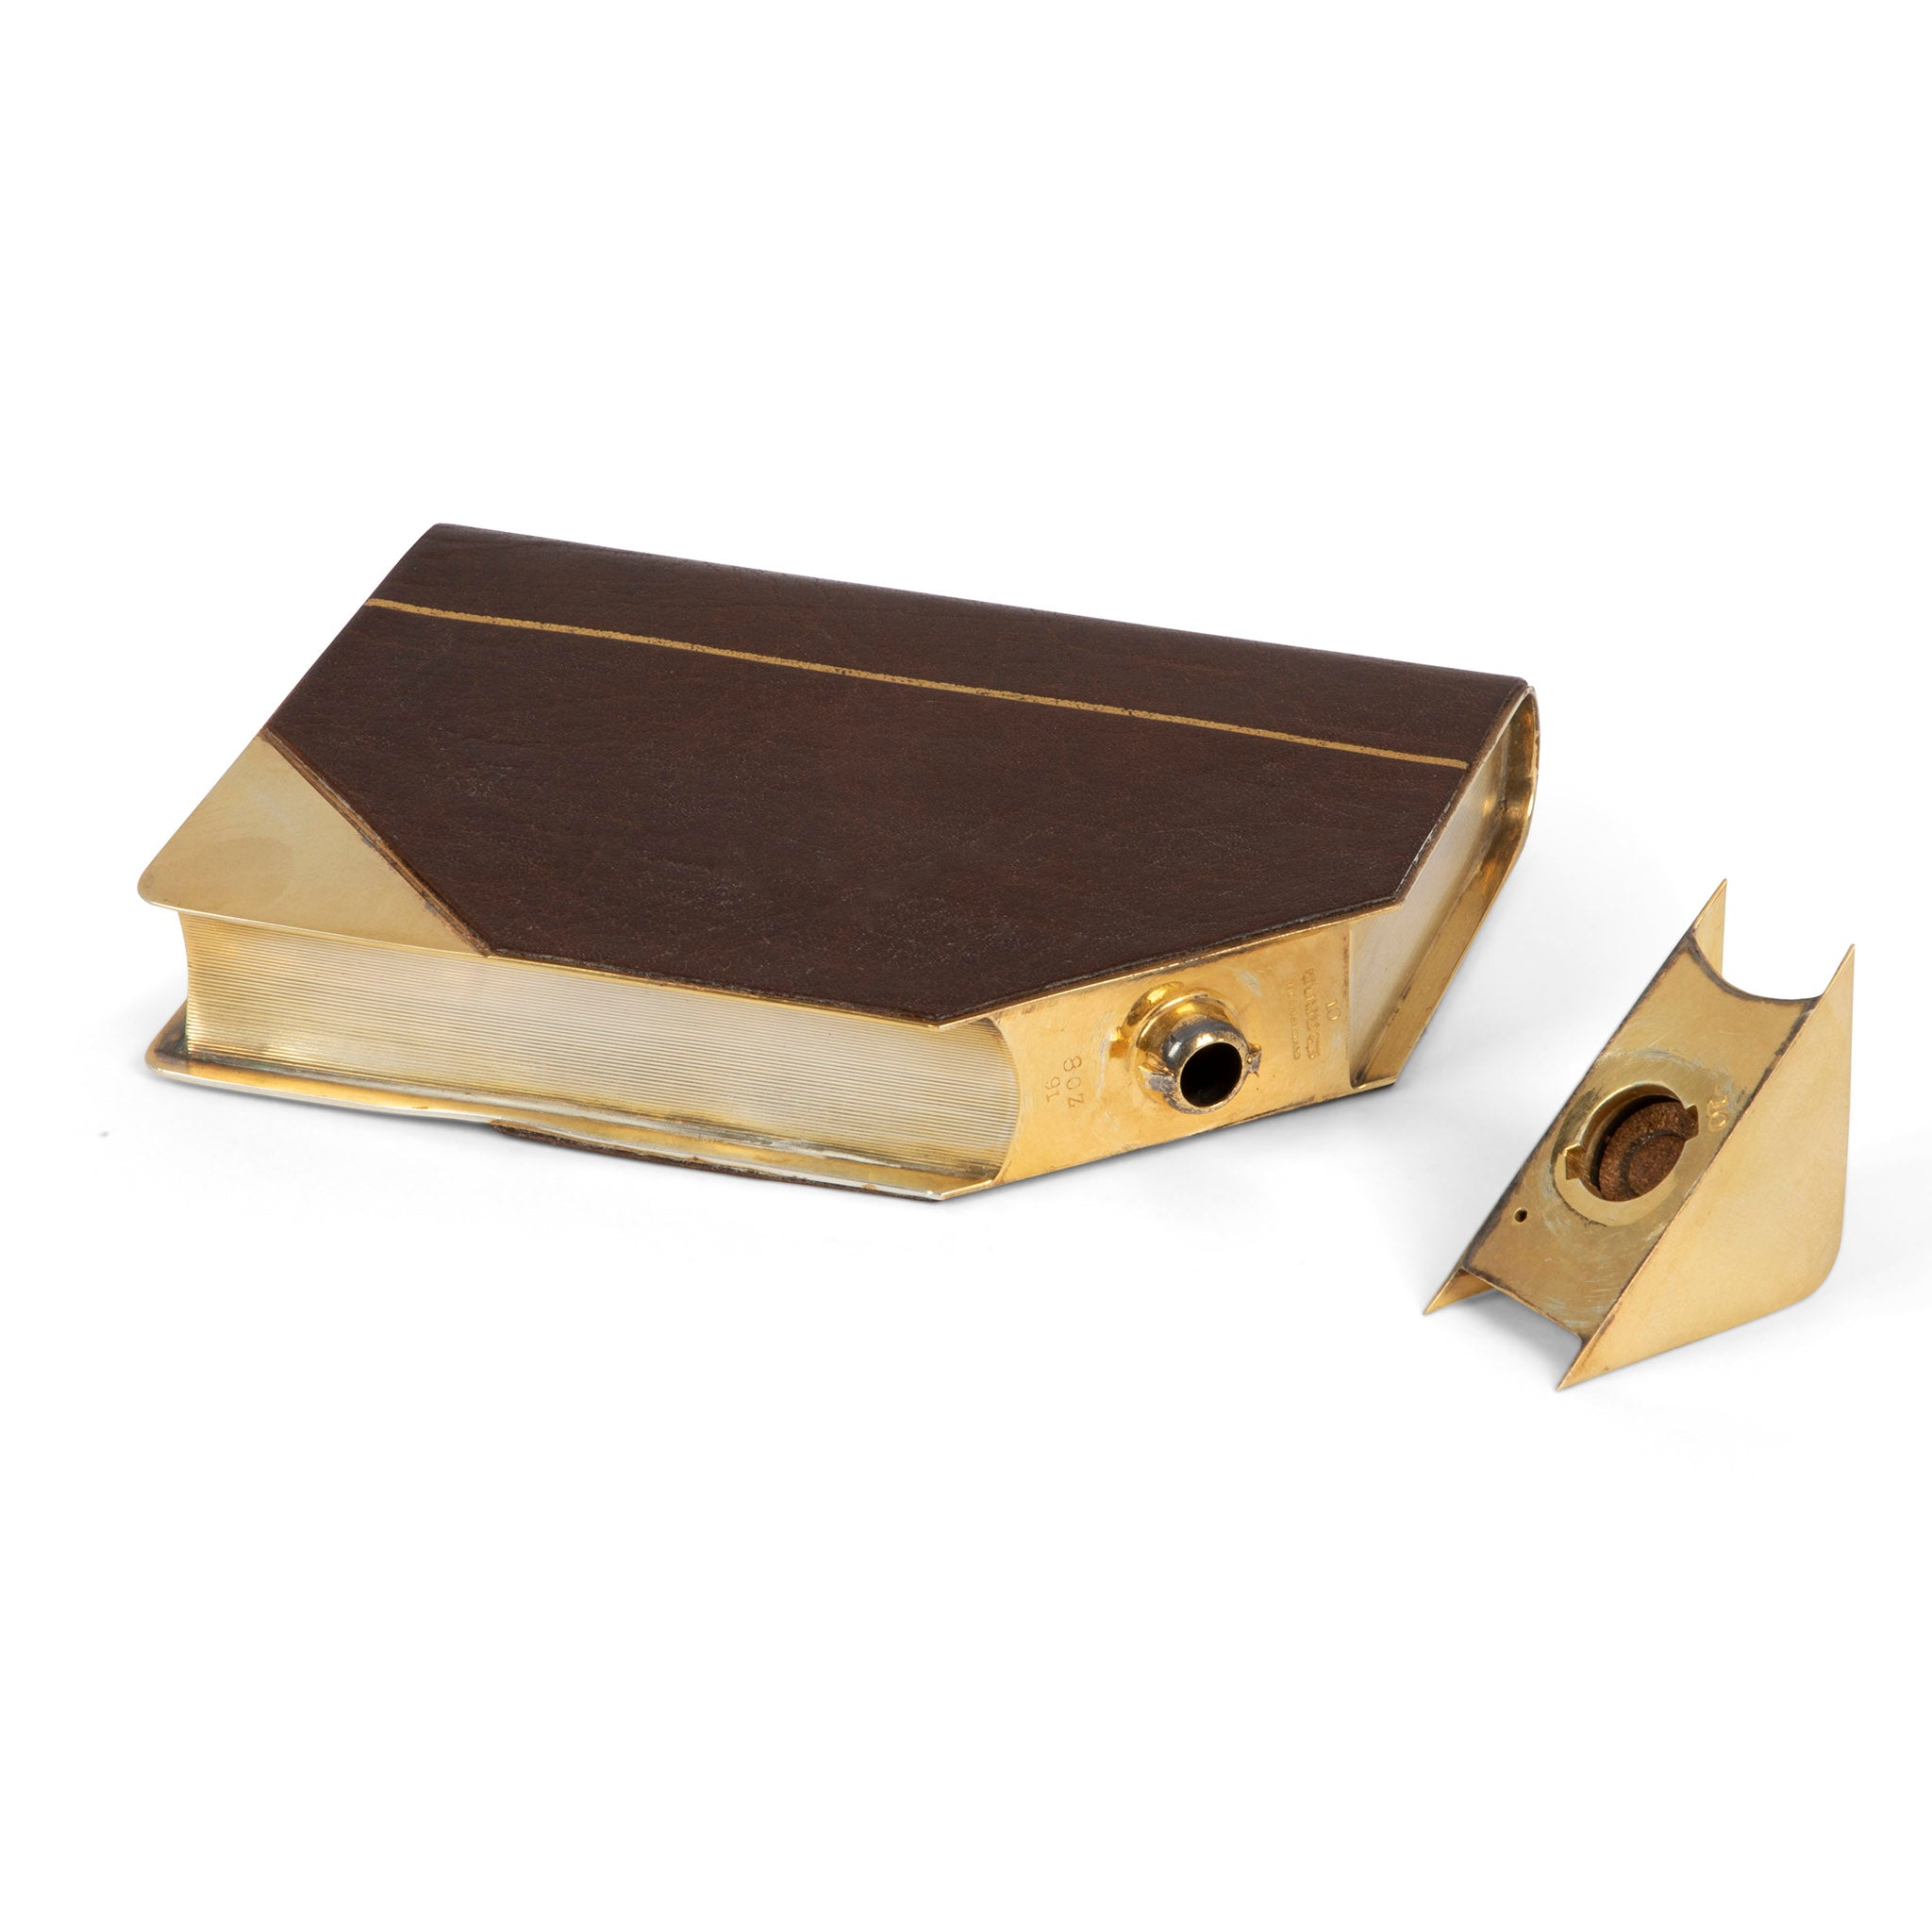 James Dixon 'Nelson's Blood' Gold Plated Book Flask